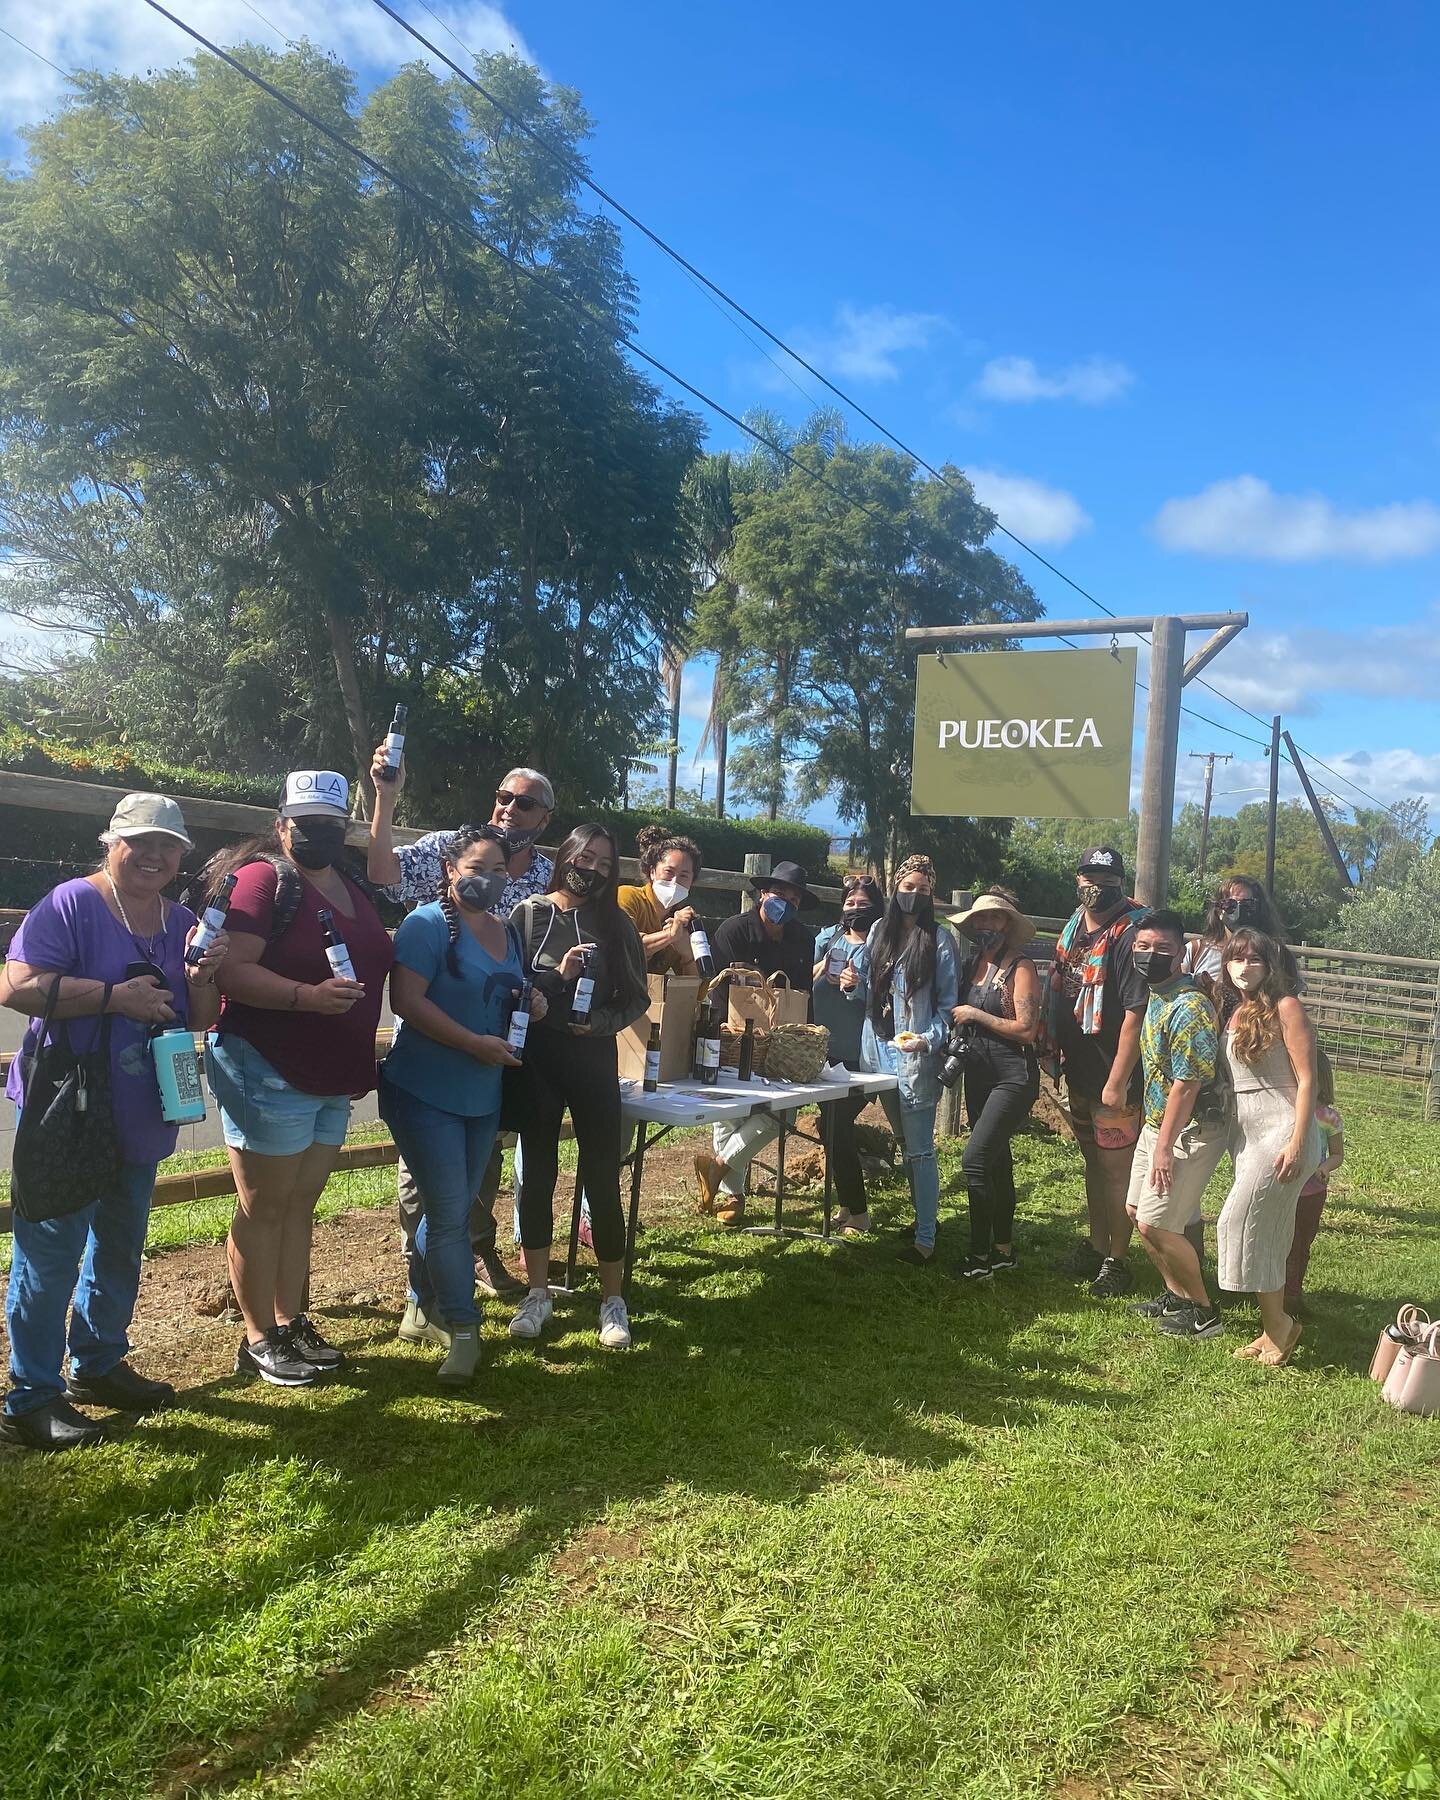 Mahalo to you all for a wonderful Saturday morning back in January! Was a joy to be a part of this tour and share story with you all 🙏

@frankerzzz @pomaiweigert @oahurcd @gofarmhawaii @sfdhawaii 

#familyfarms #mauifarm #oliveoil #evoo #upcountryma